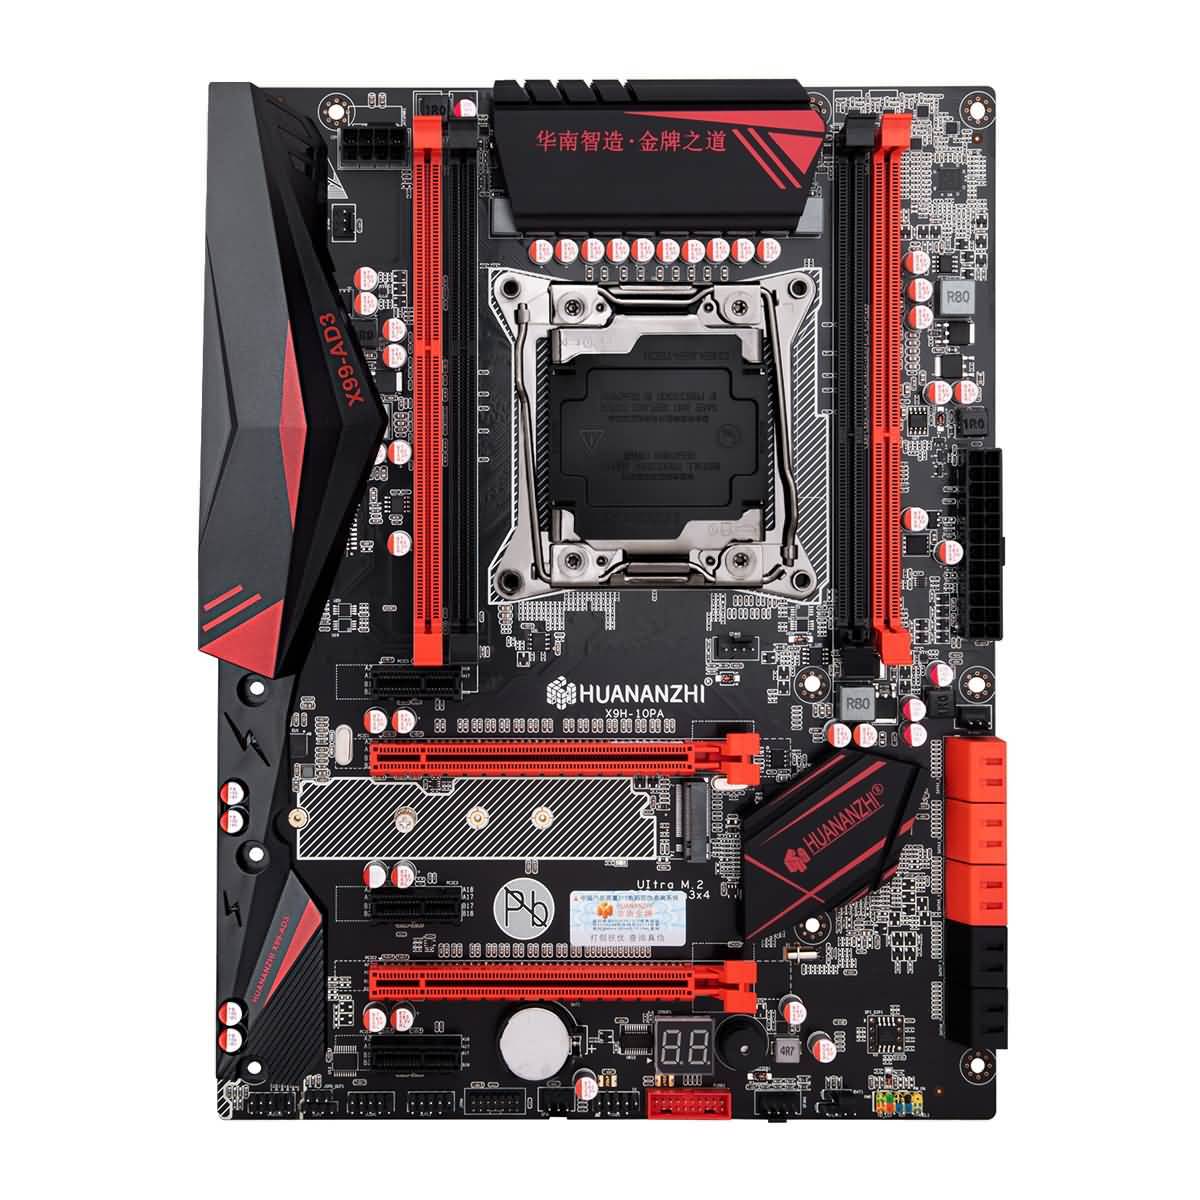 Download Huananzhi X99-AD3 Motherboard Free